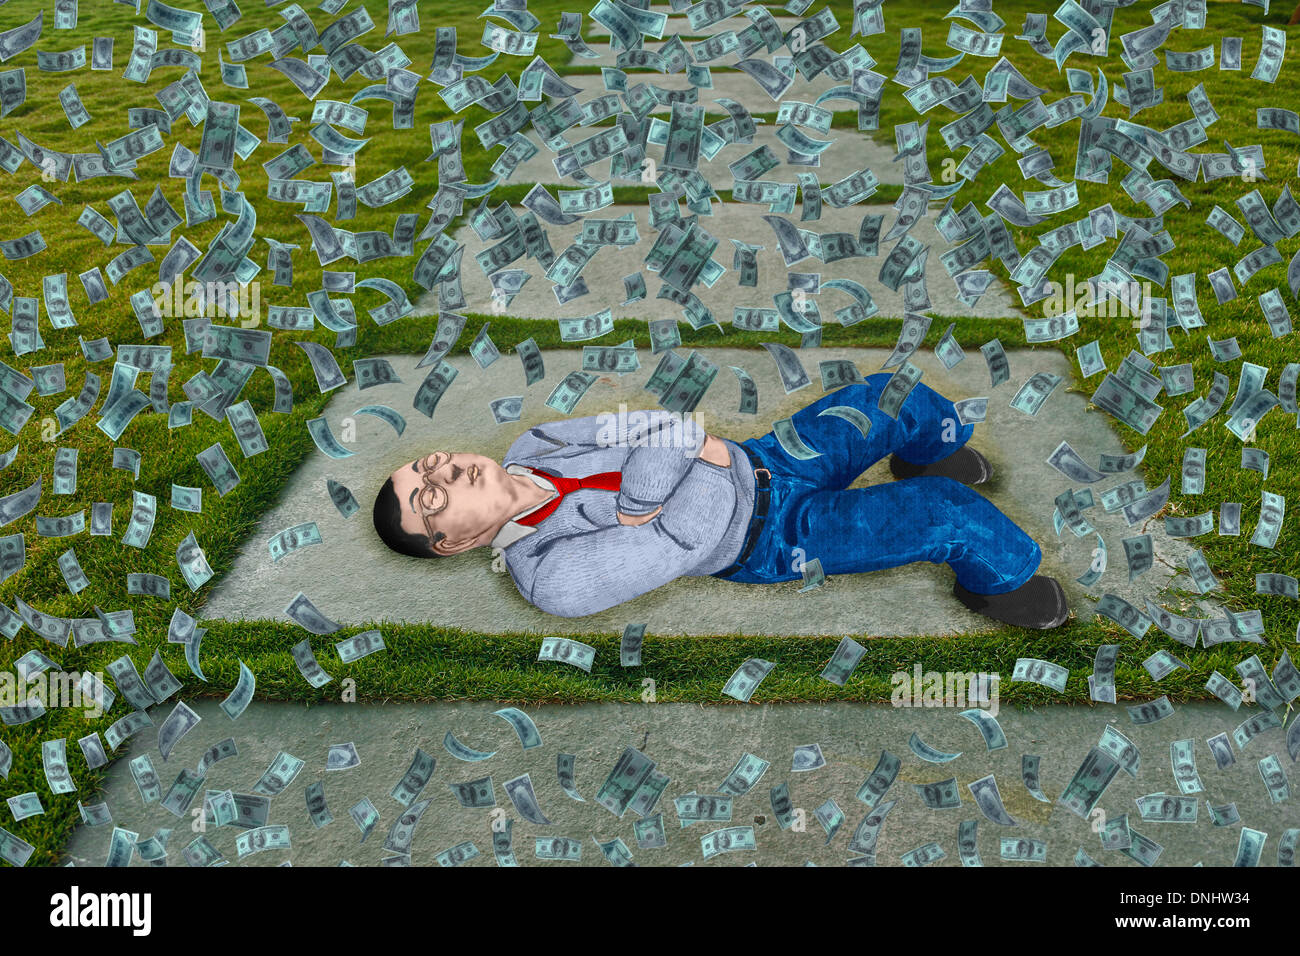 Man sleeping or relaxing, illustration concept Stock Photo